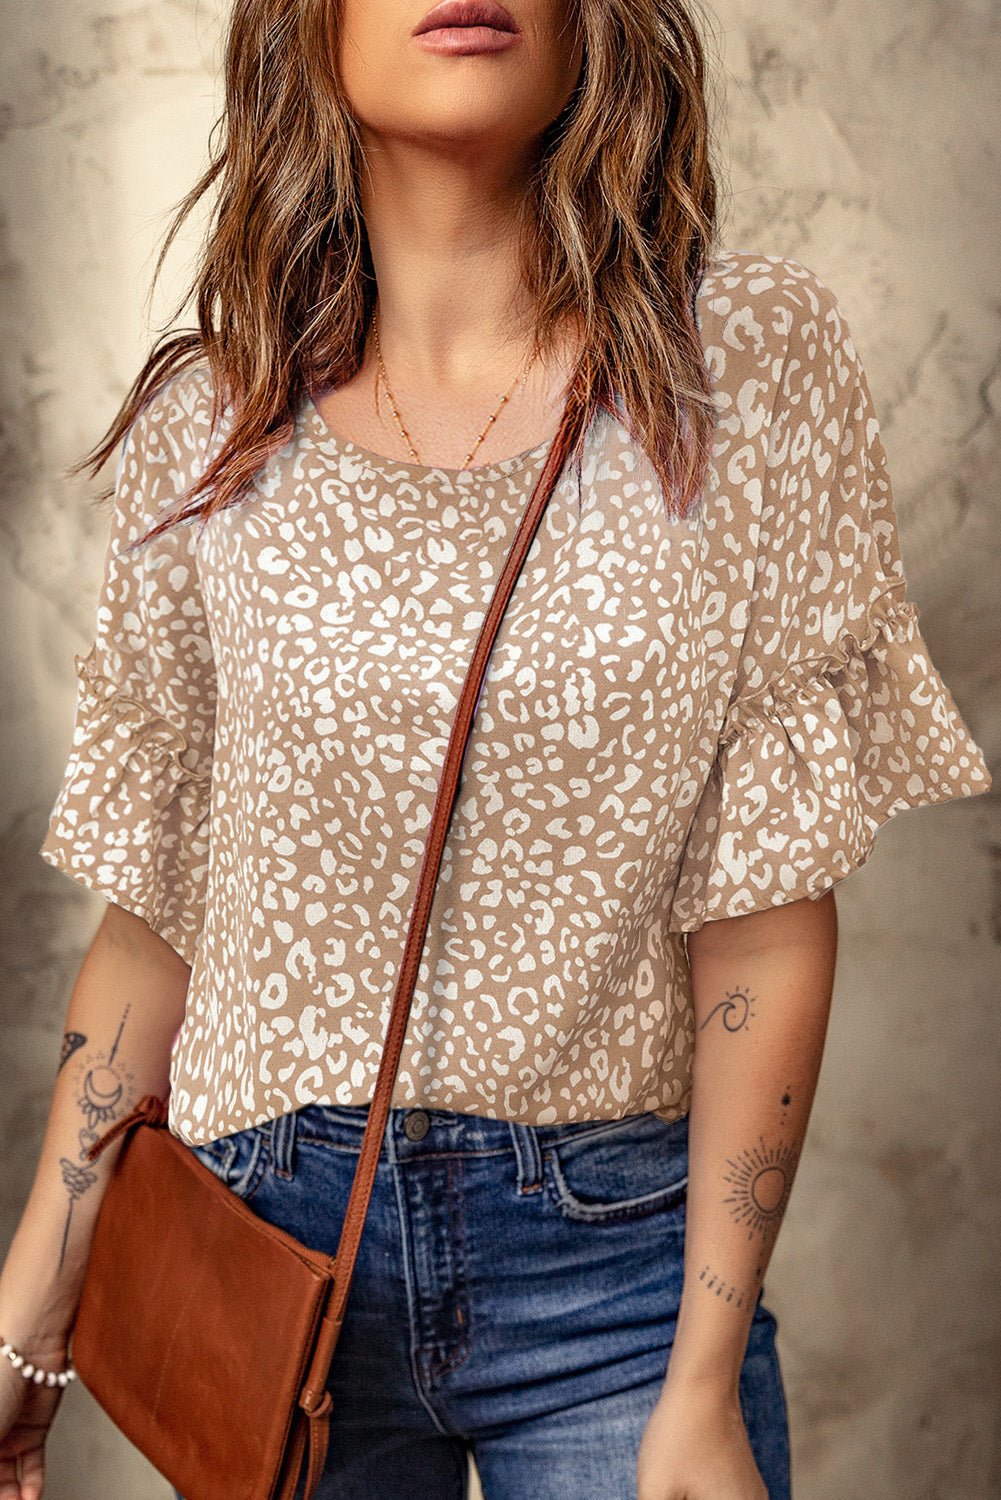 Leopard Spotted Ruffle Sleeve T-Shirt